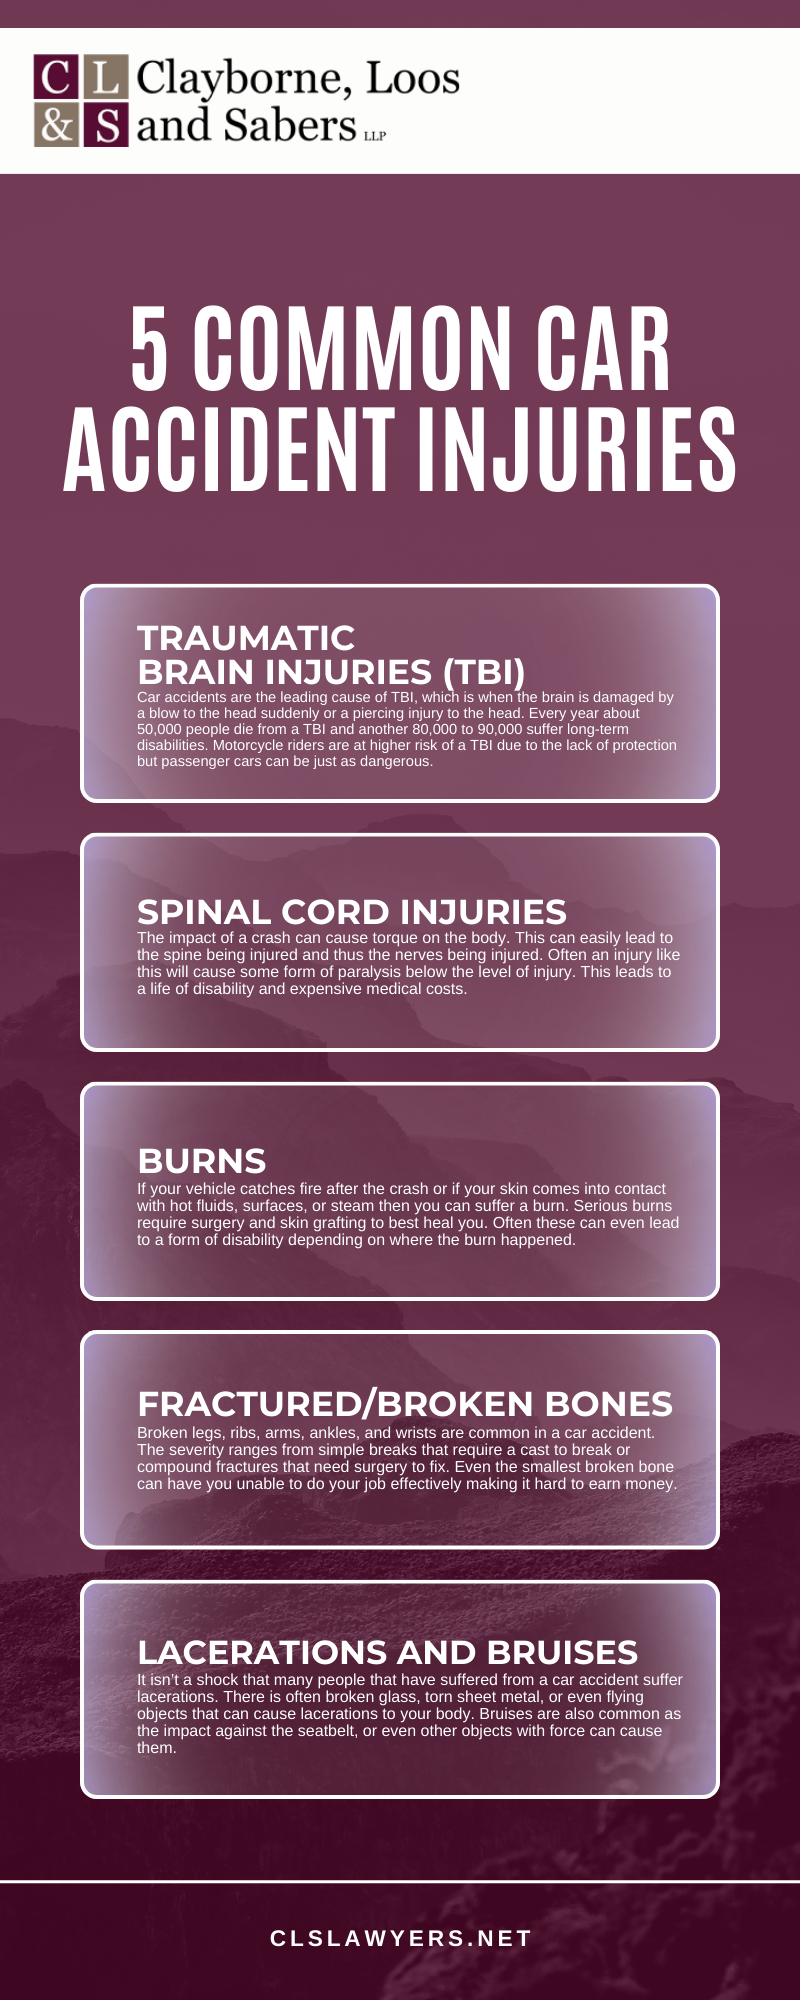 5 Common Car Accident Injuries Infographic